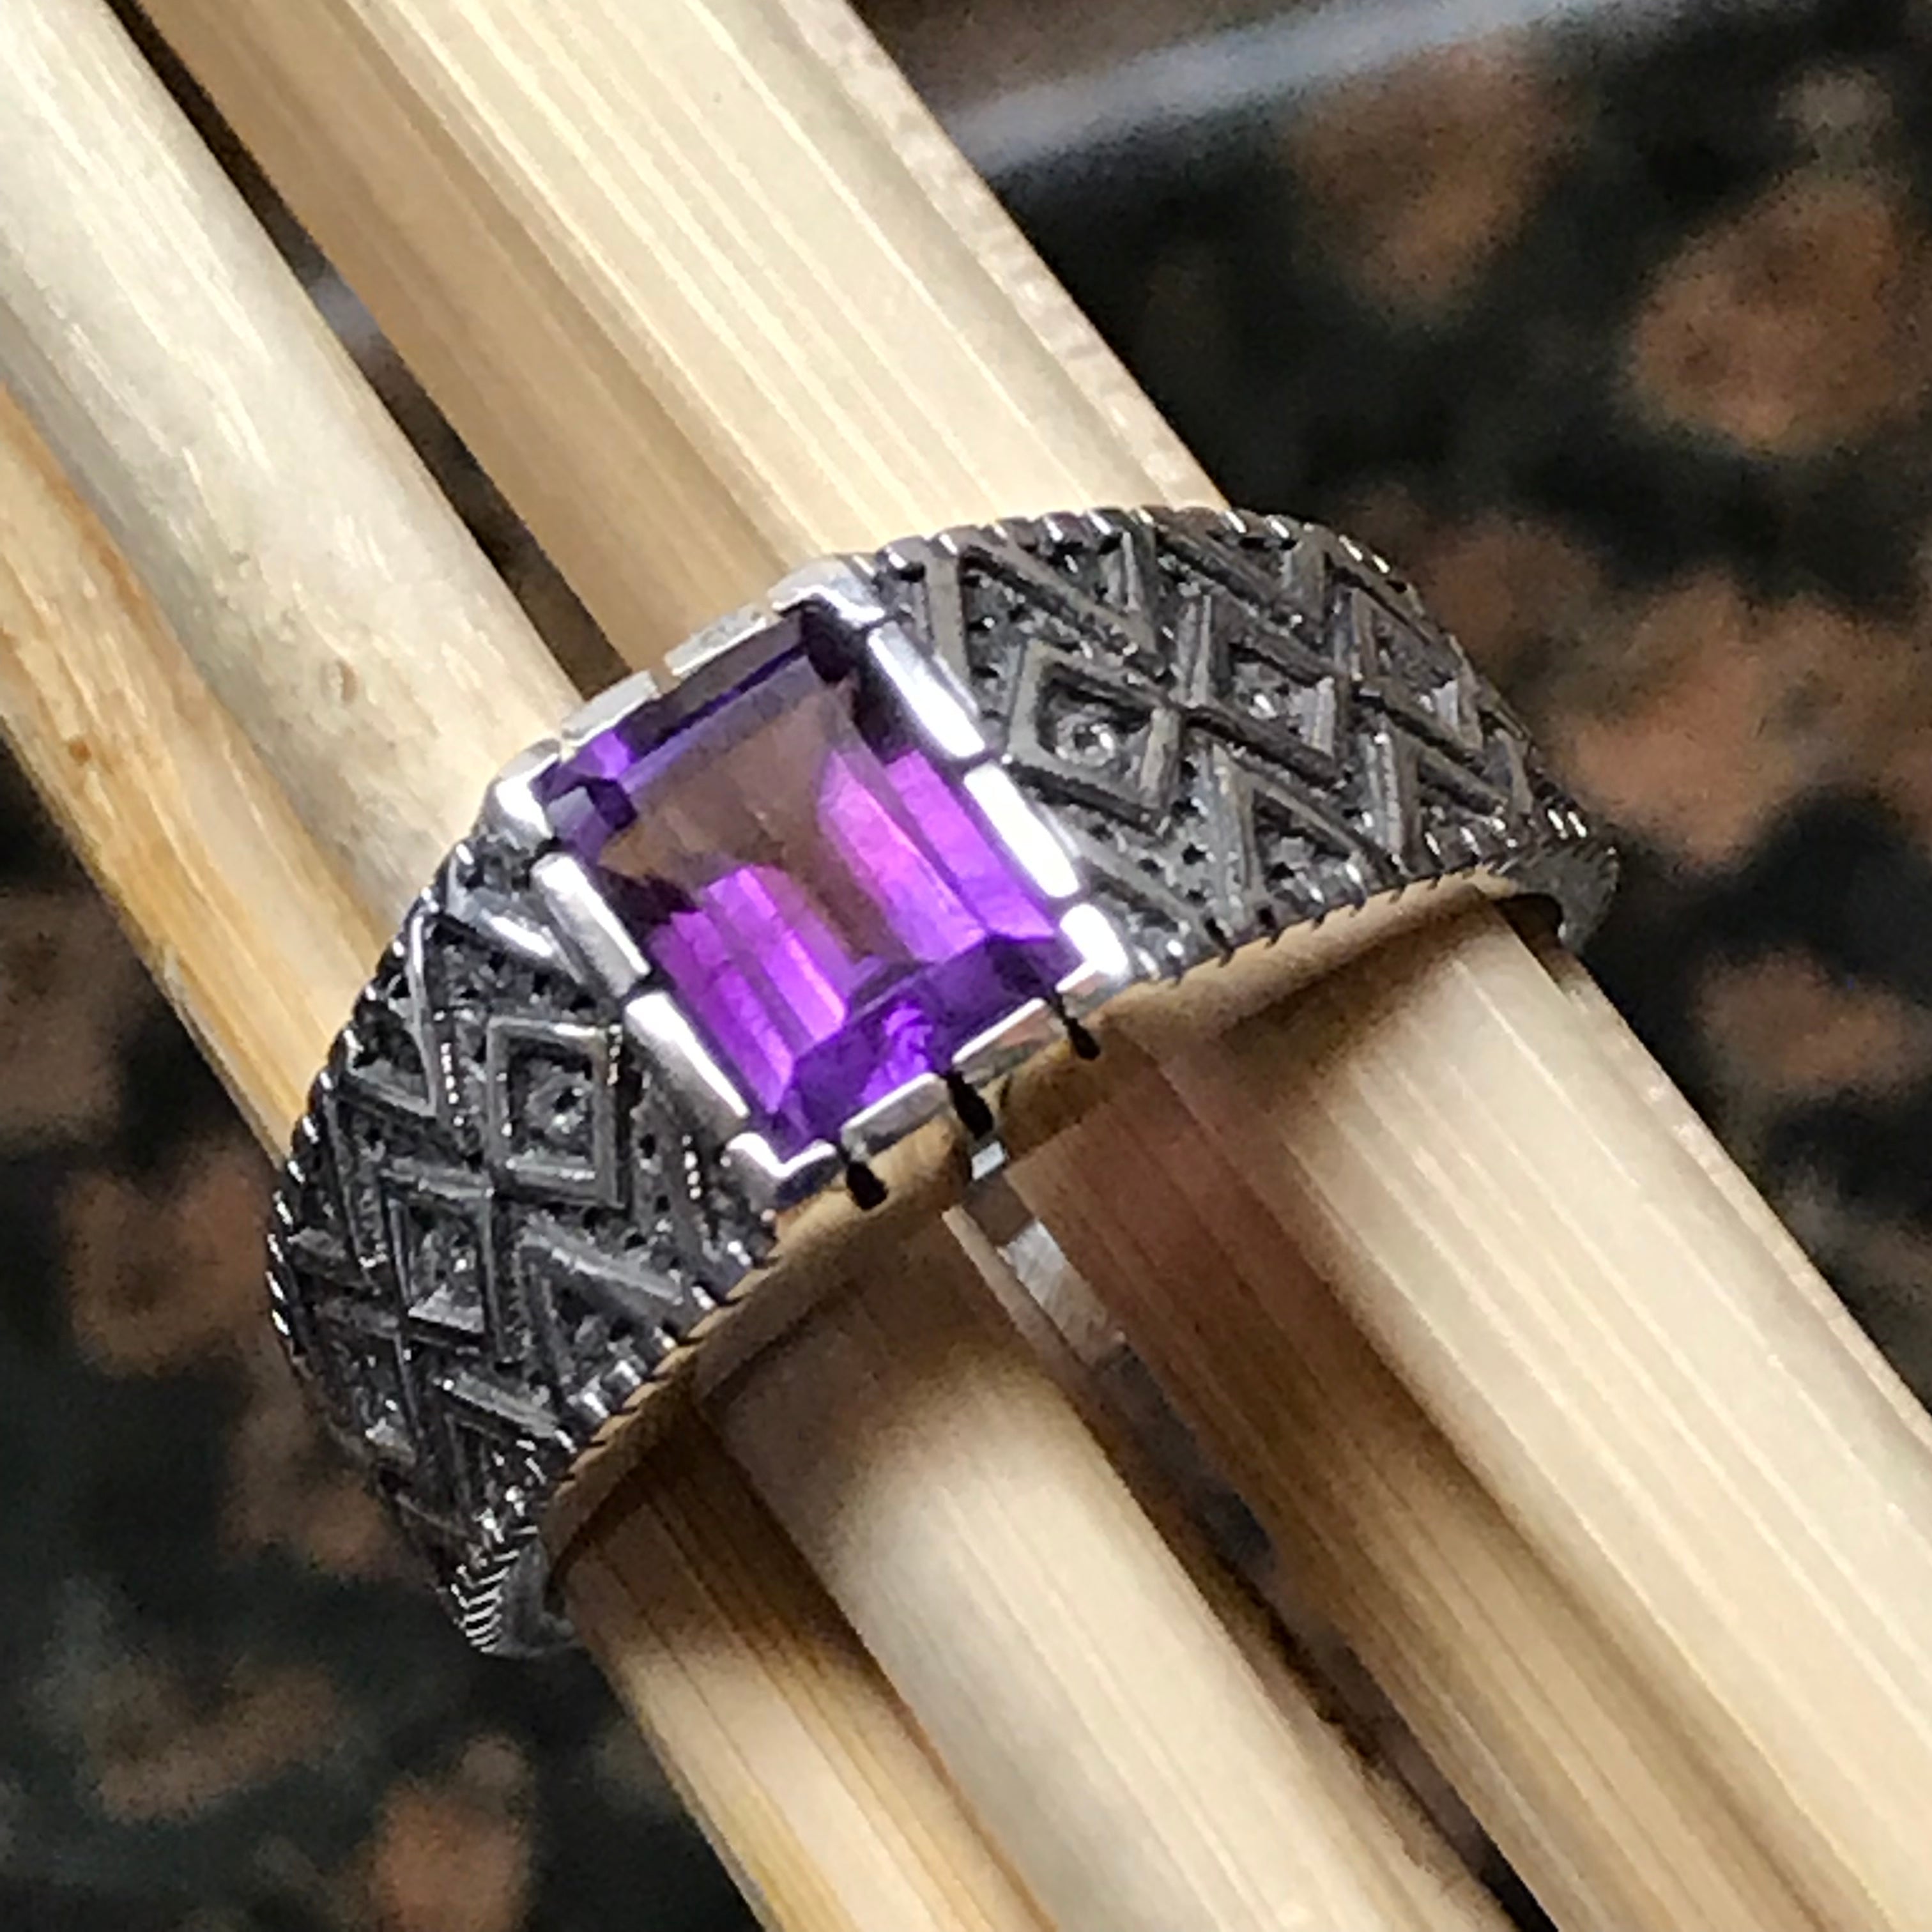 Genuine 2ct Purple Amethyst 925 Solid Sterling Silver Men's Ring Size 7, 8, 9, 10, 11, 12, 13 - Natural Rocks by Kala